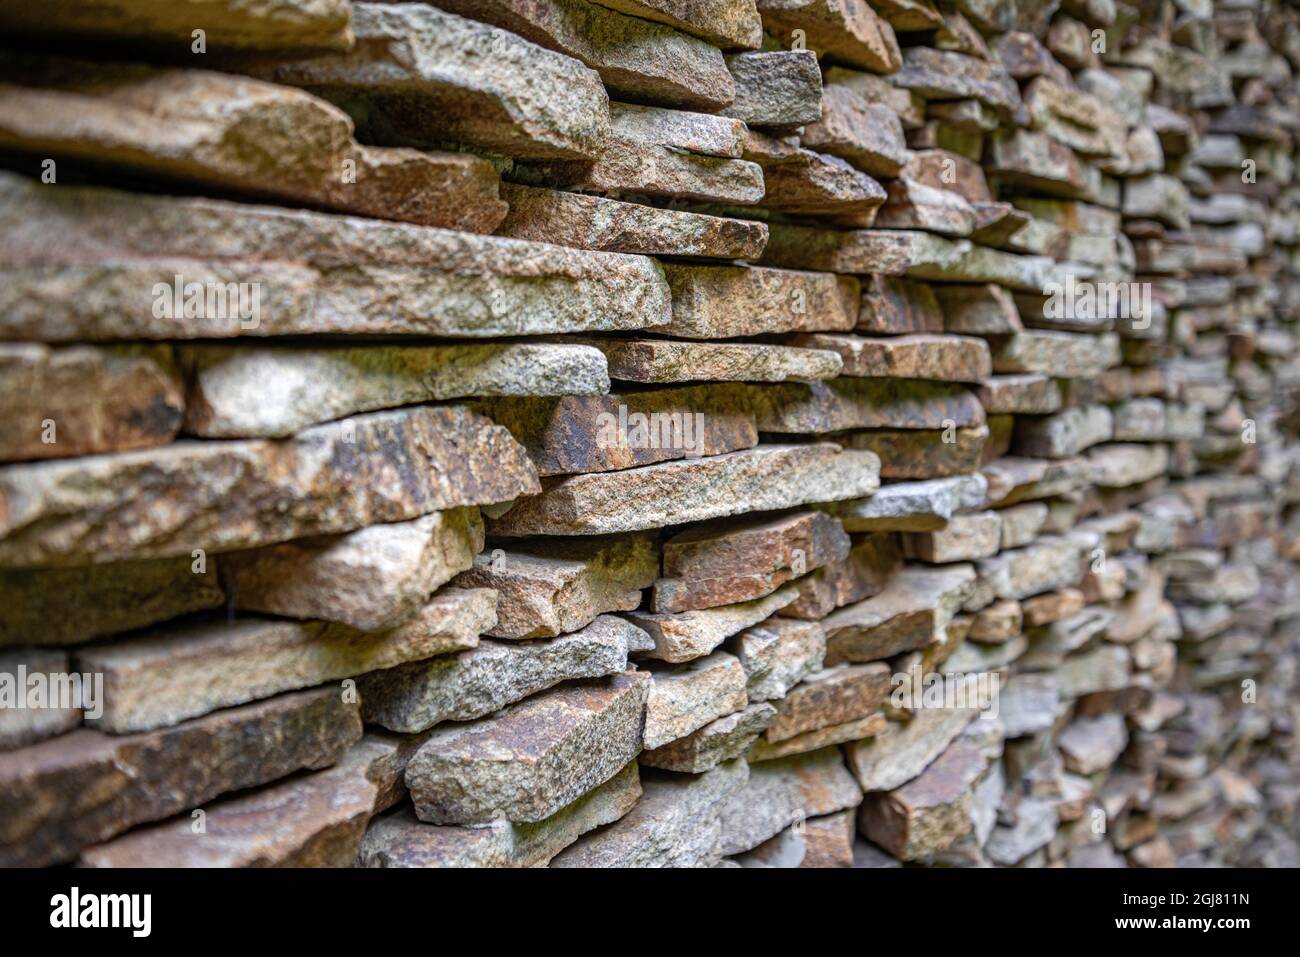 The wall is lined with small flat stones. Stock Photo